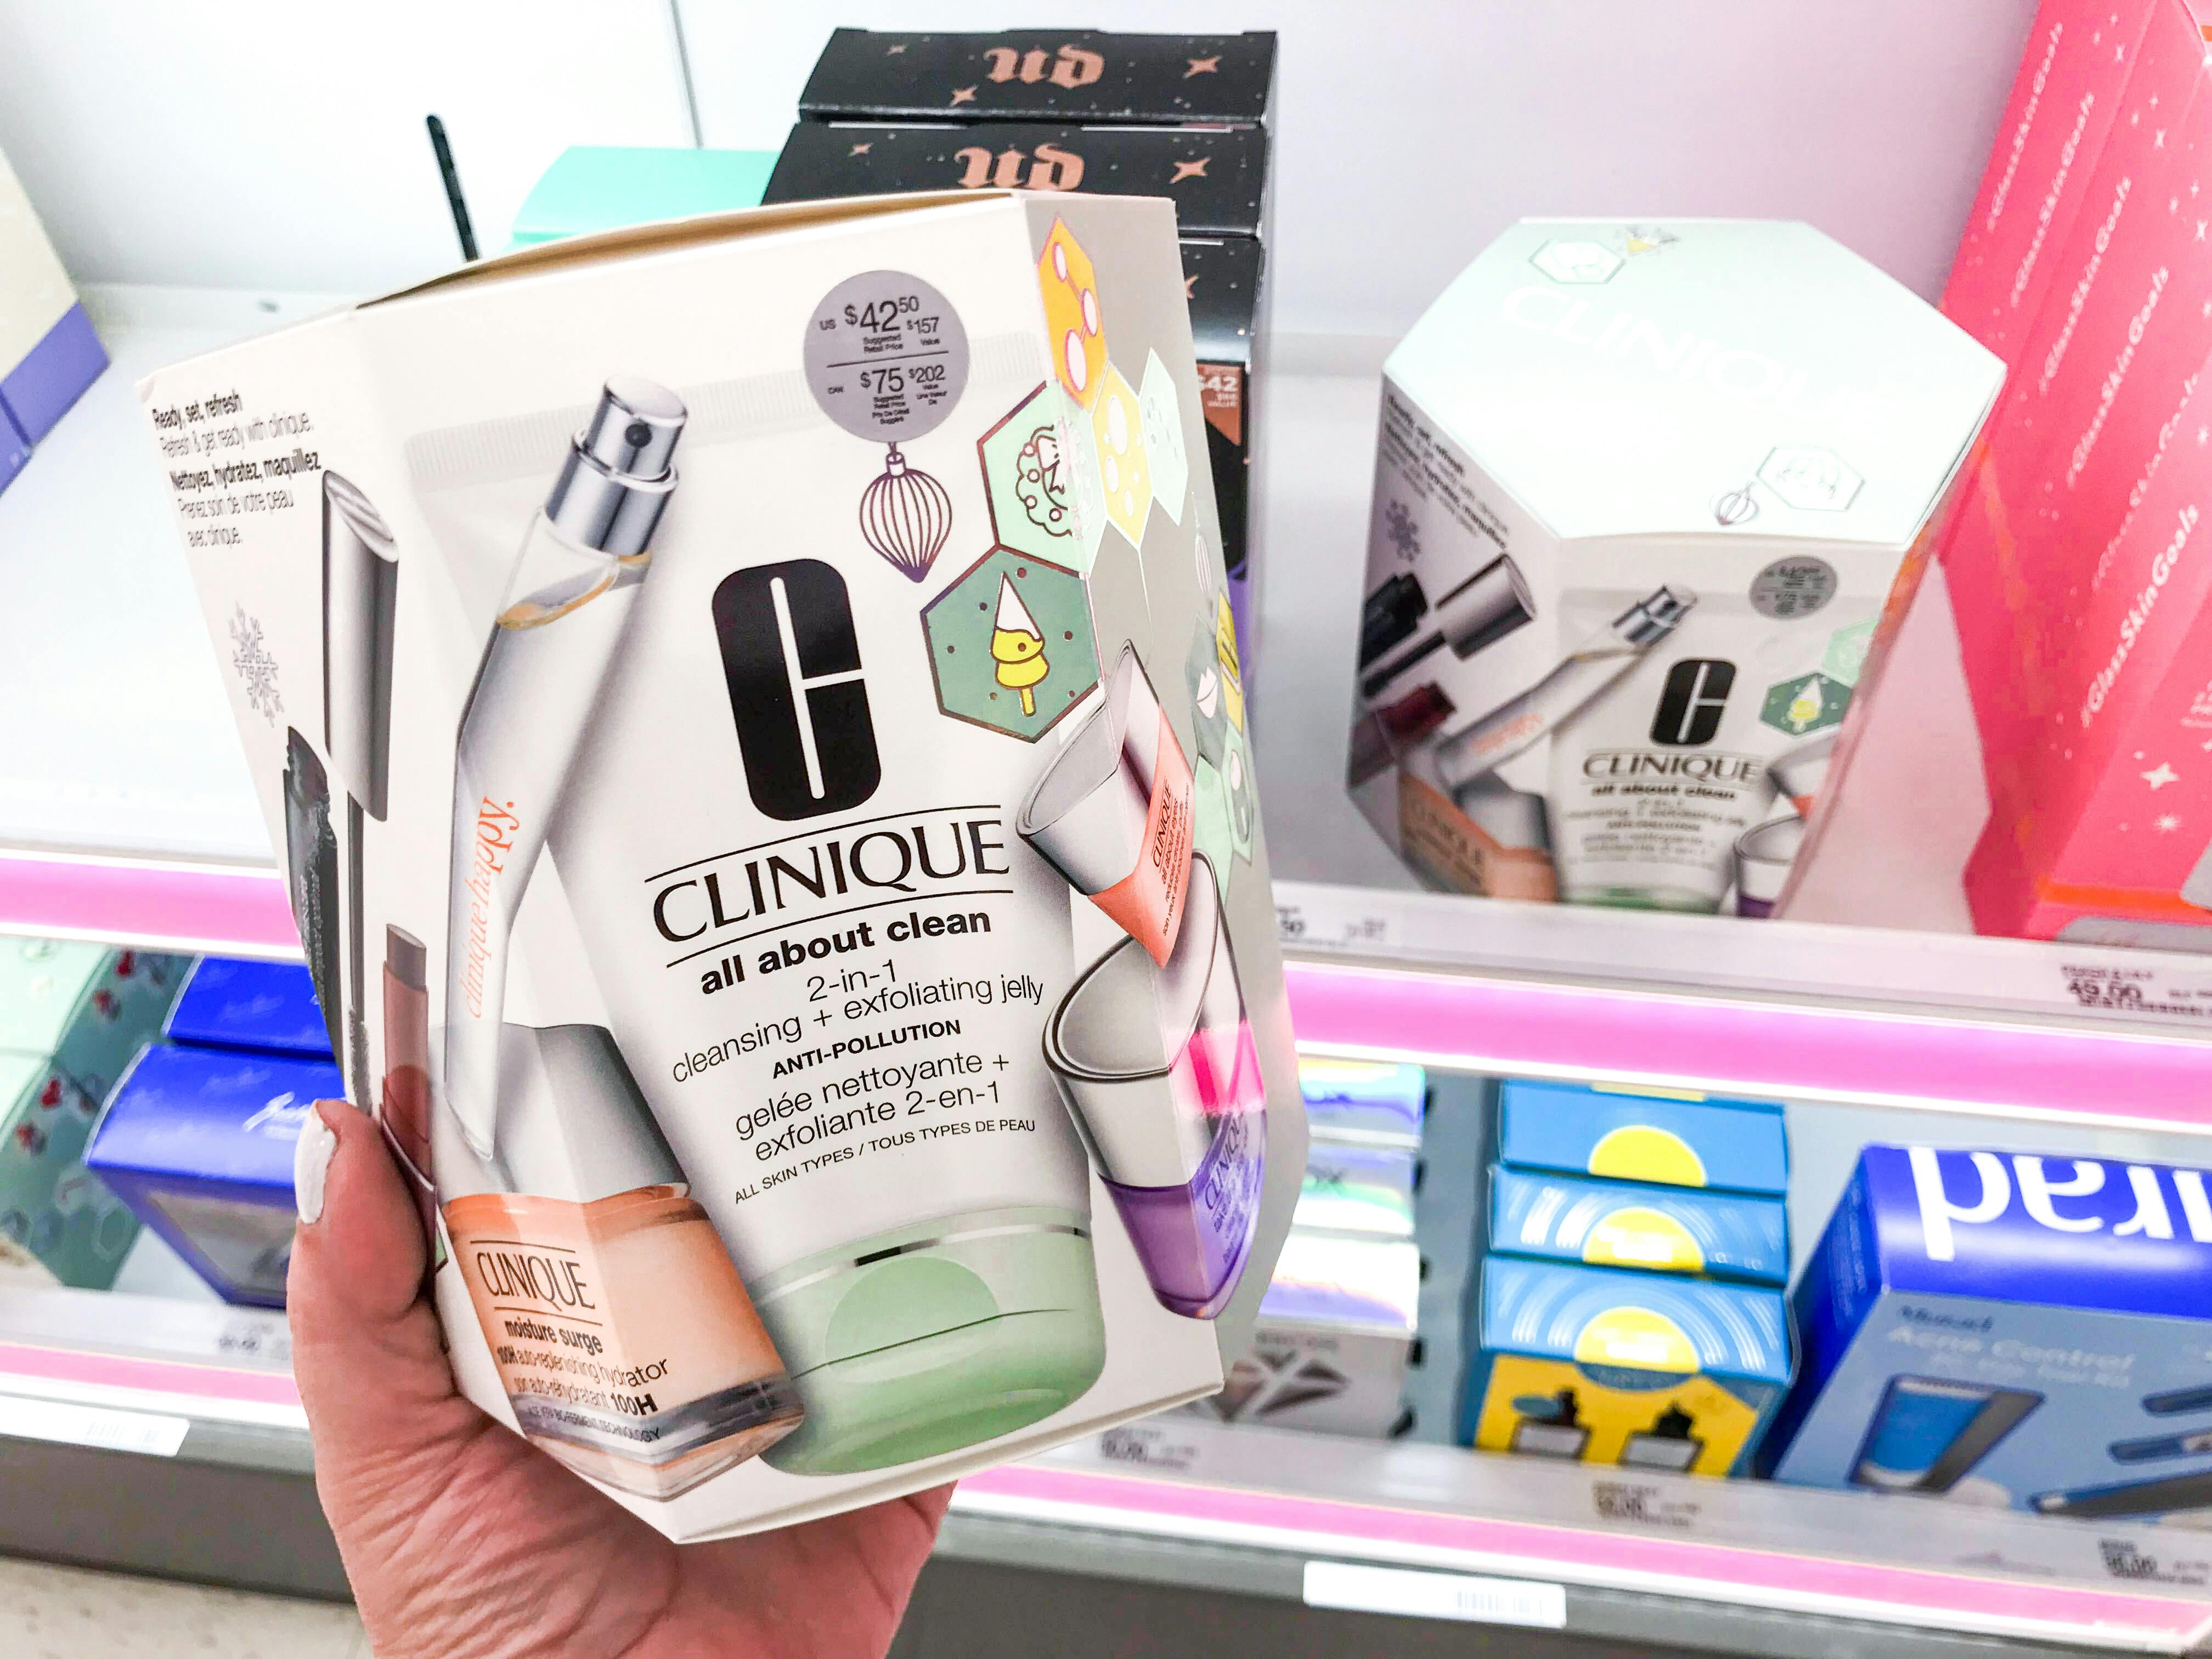 ulta-beauty-gift-sets-at-target-clinique-ulta-exclusive-blockbuster-ready-set-refresh-skincare-12